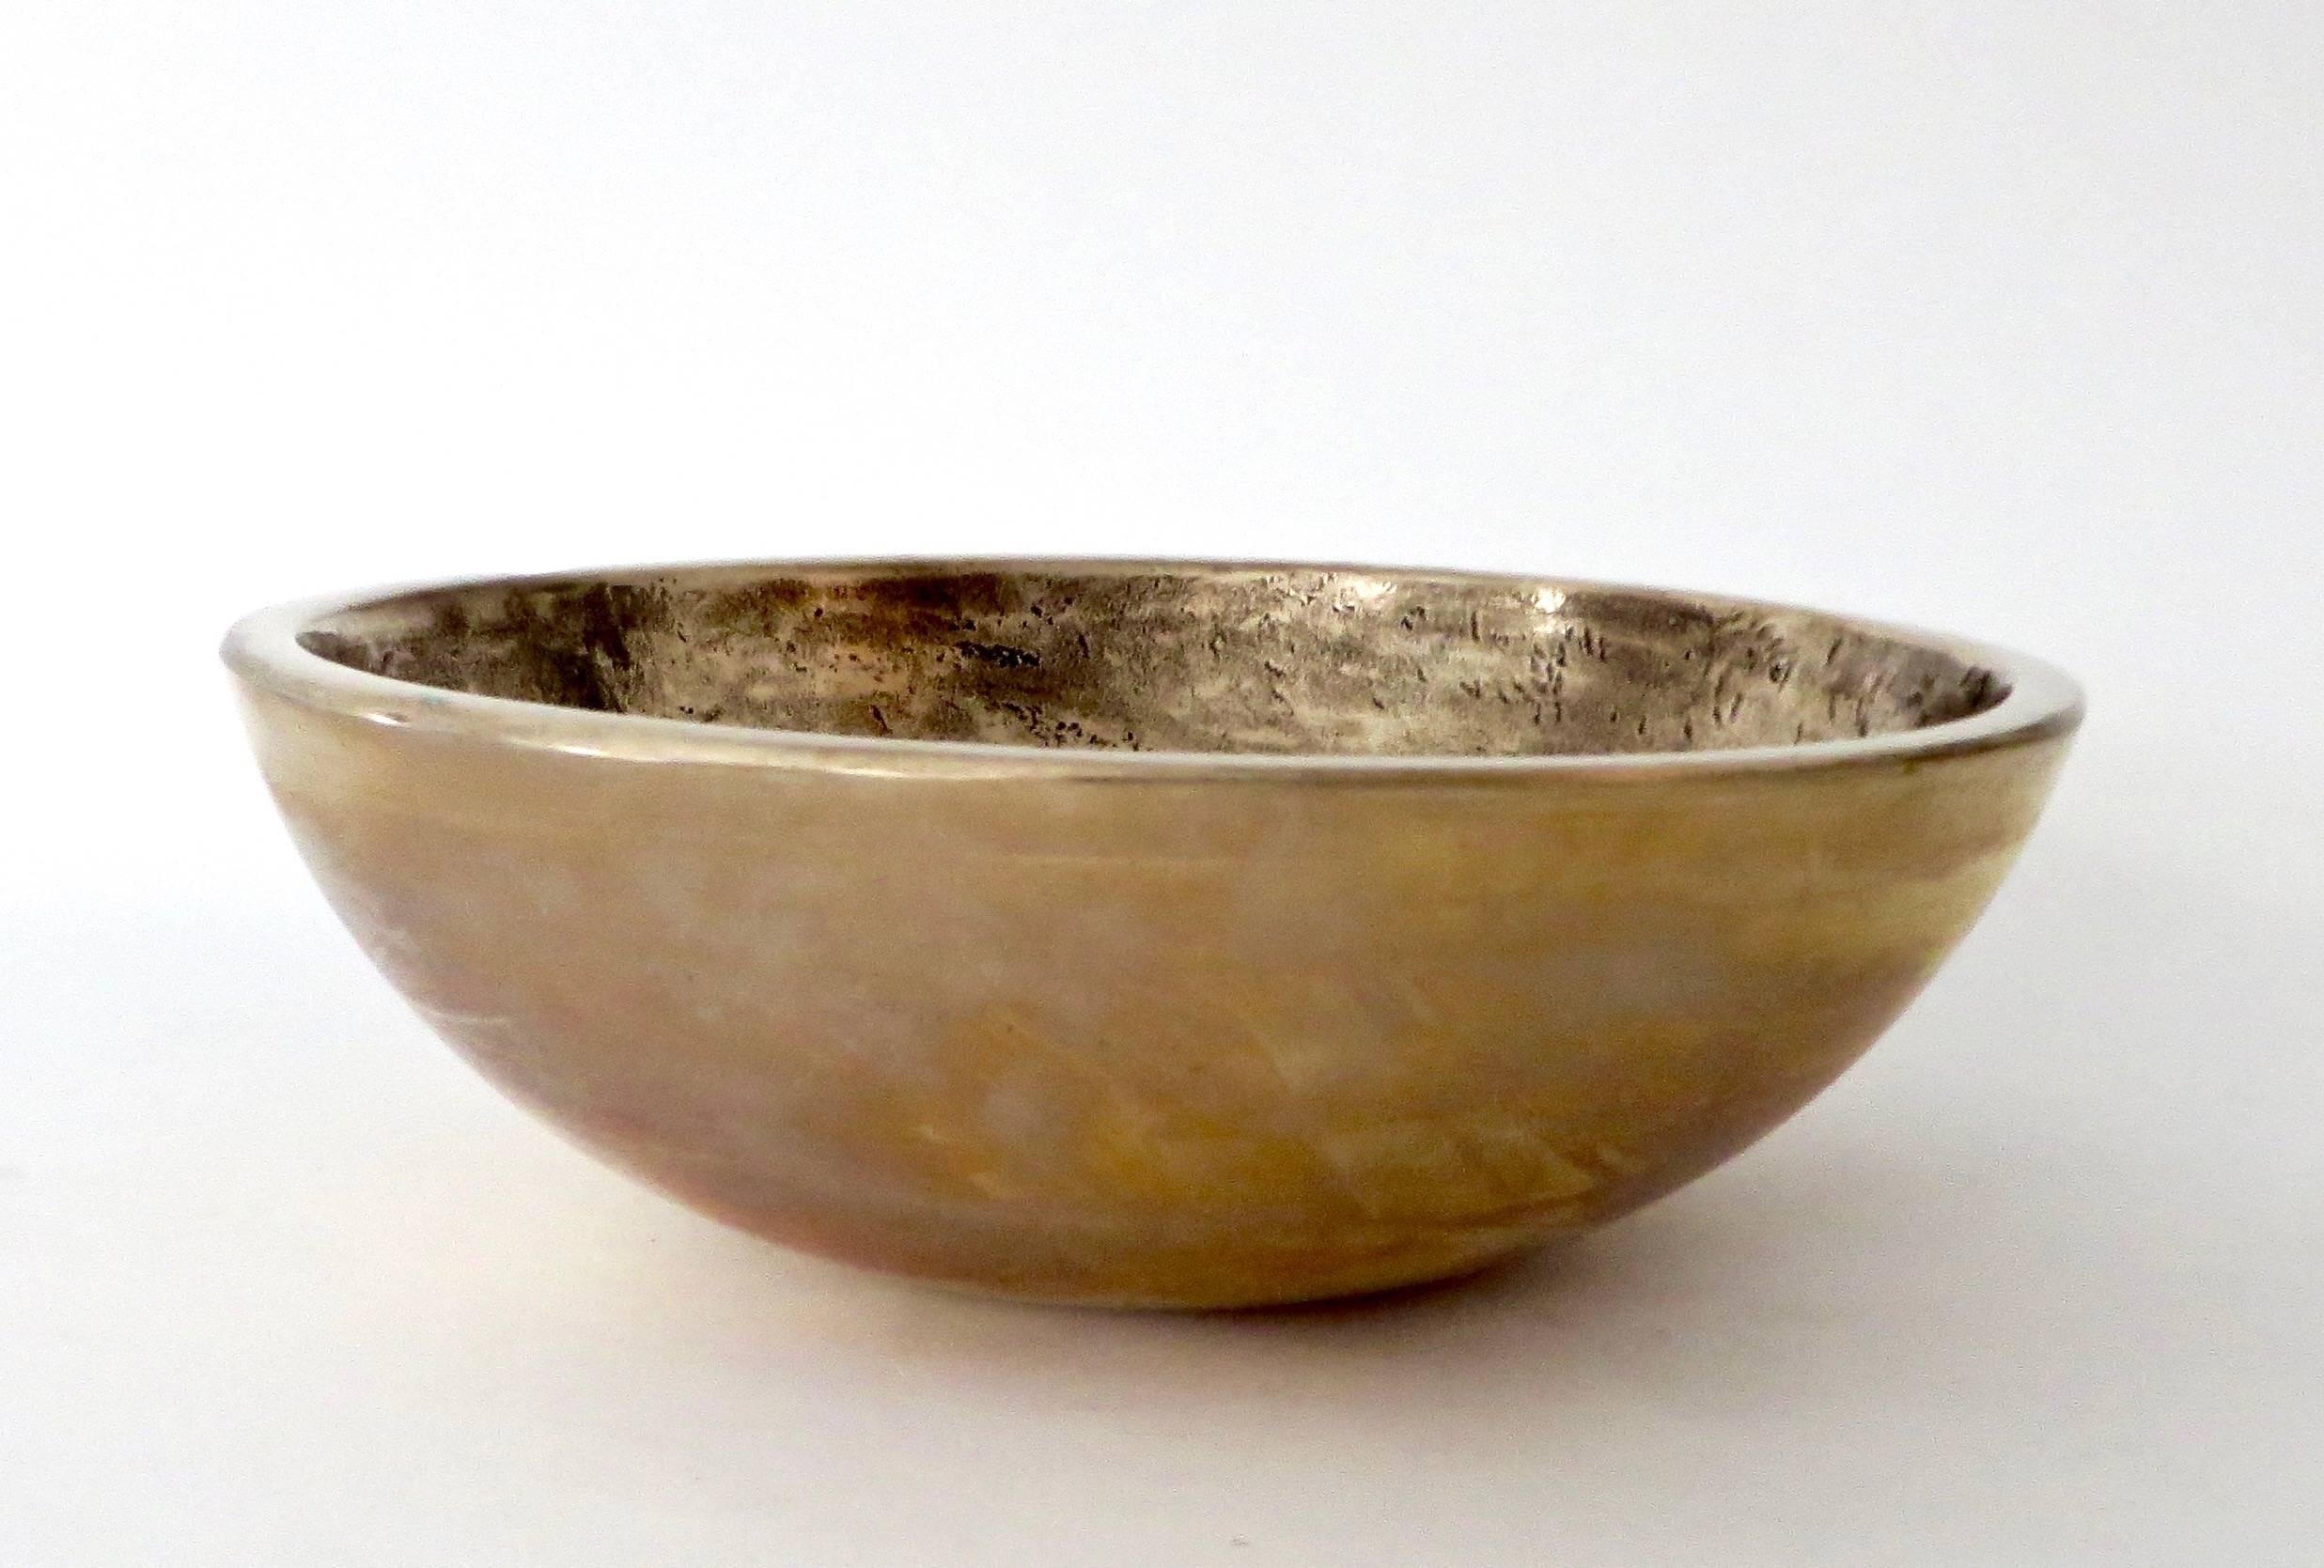 Bronze bowls by contemporary Chicago and Los Angeles based artist Elliot Bergman.
Inspired by the sound of the vessels when lightly rung, Bergman has incorporated them into his band Wilde Belle.
Sound vessels, sound sculptures, bronze.
Each bowl